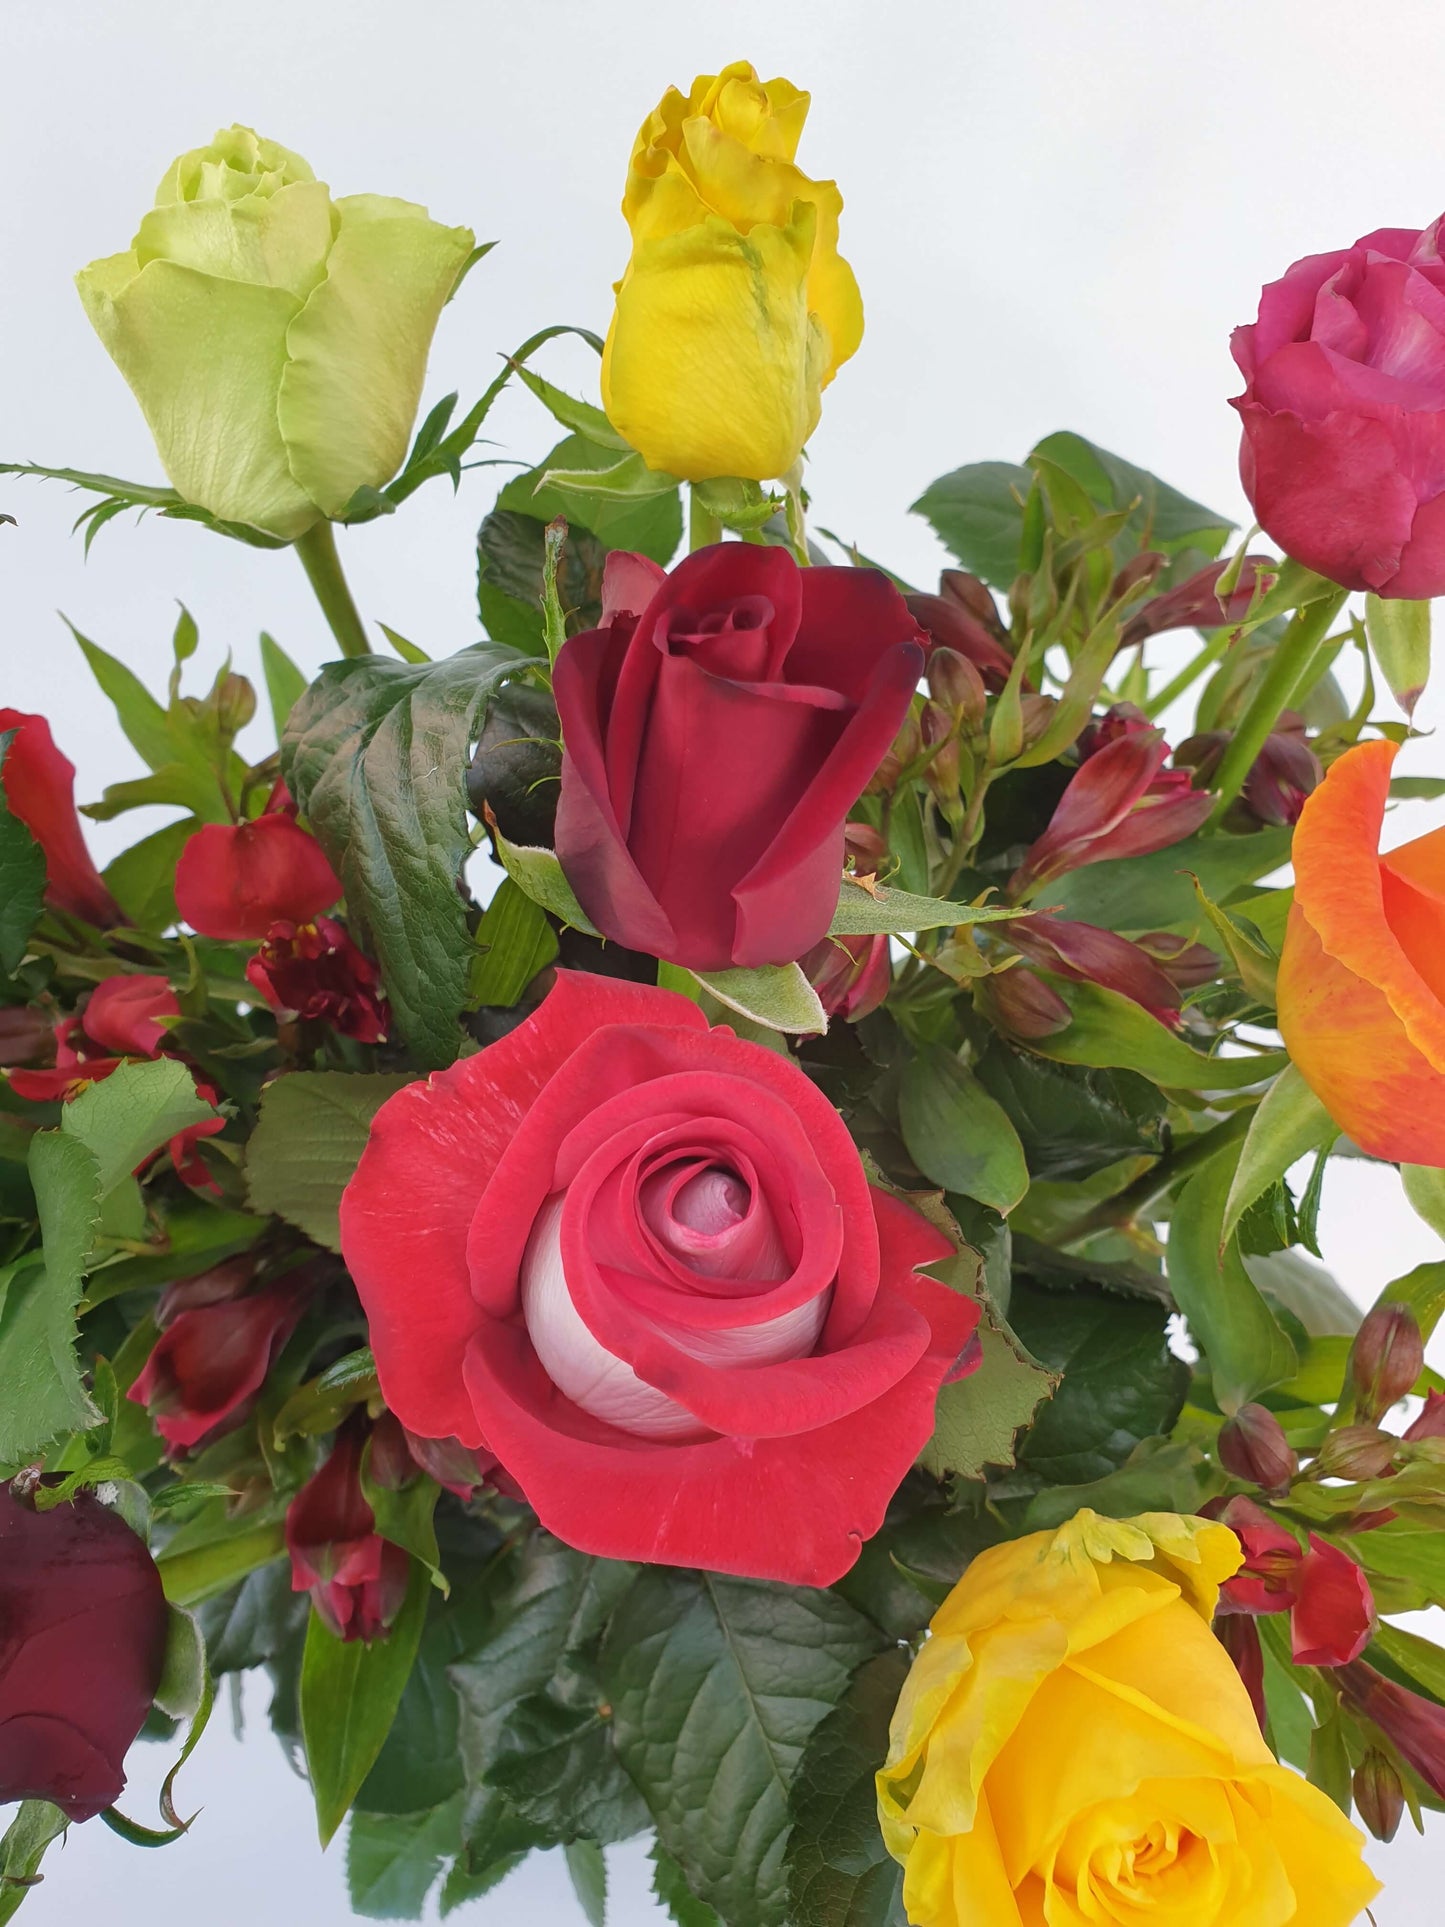 A dozen bright red, orange, yellow, and green roses up close